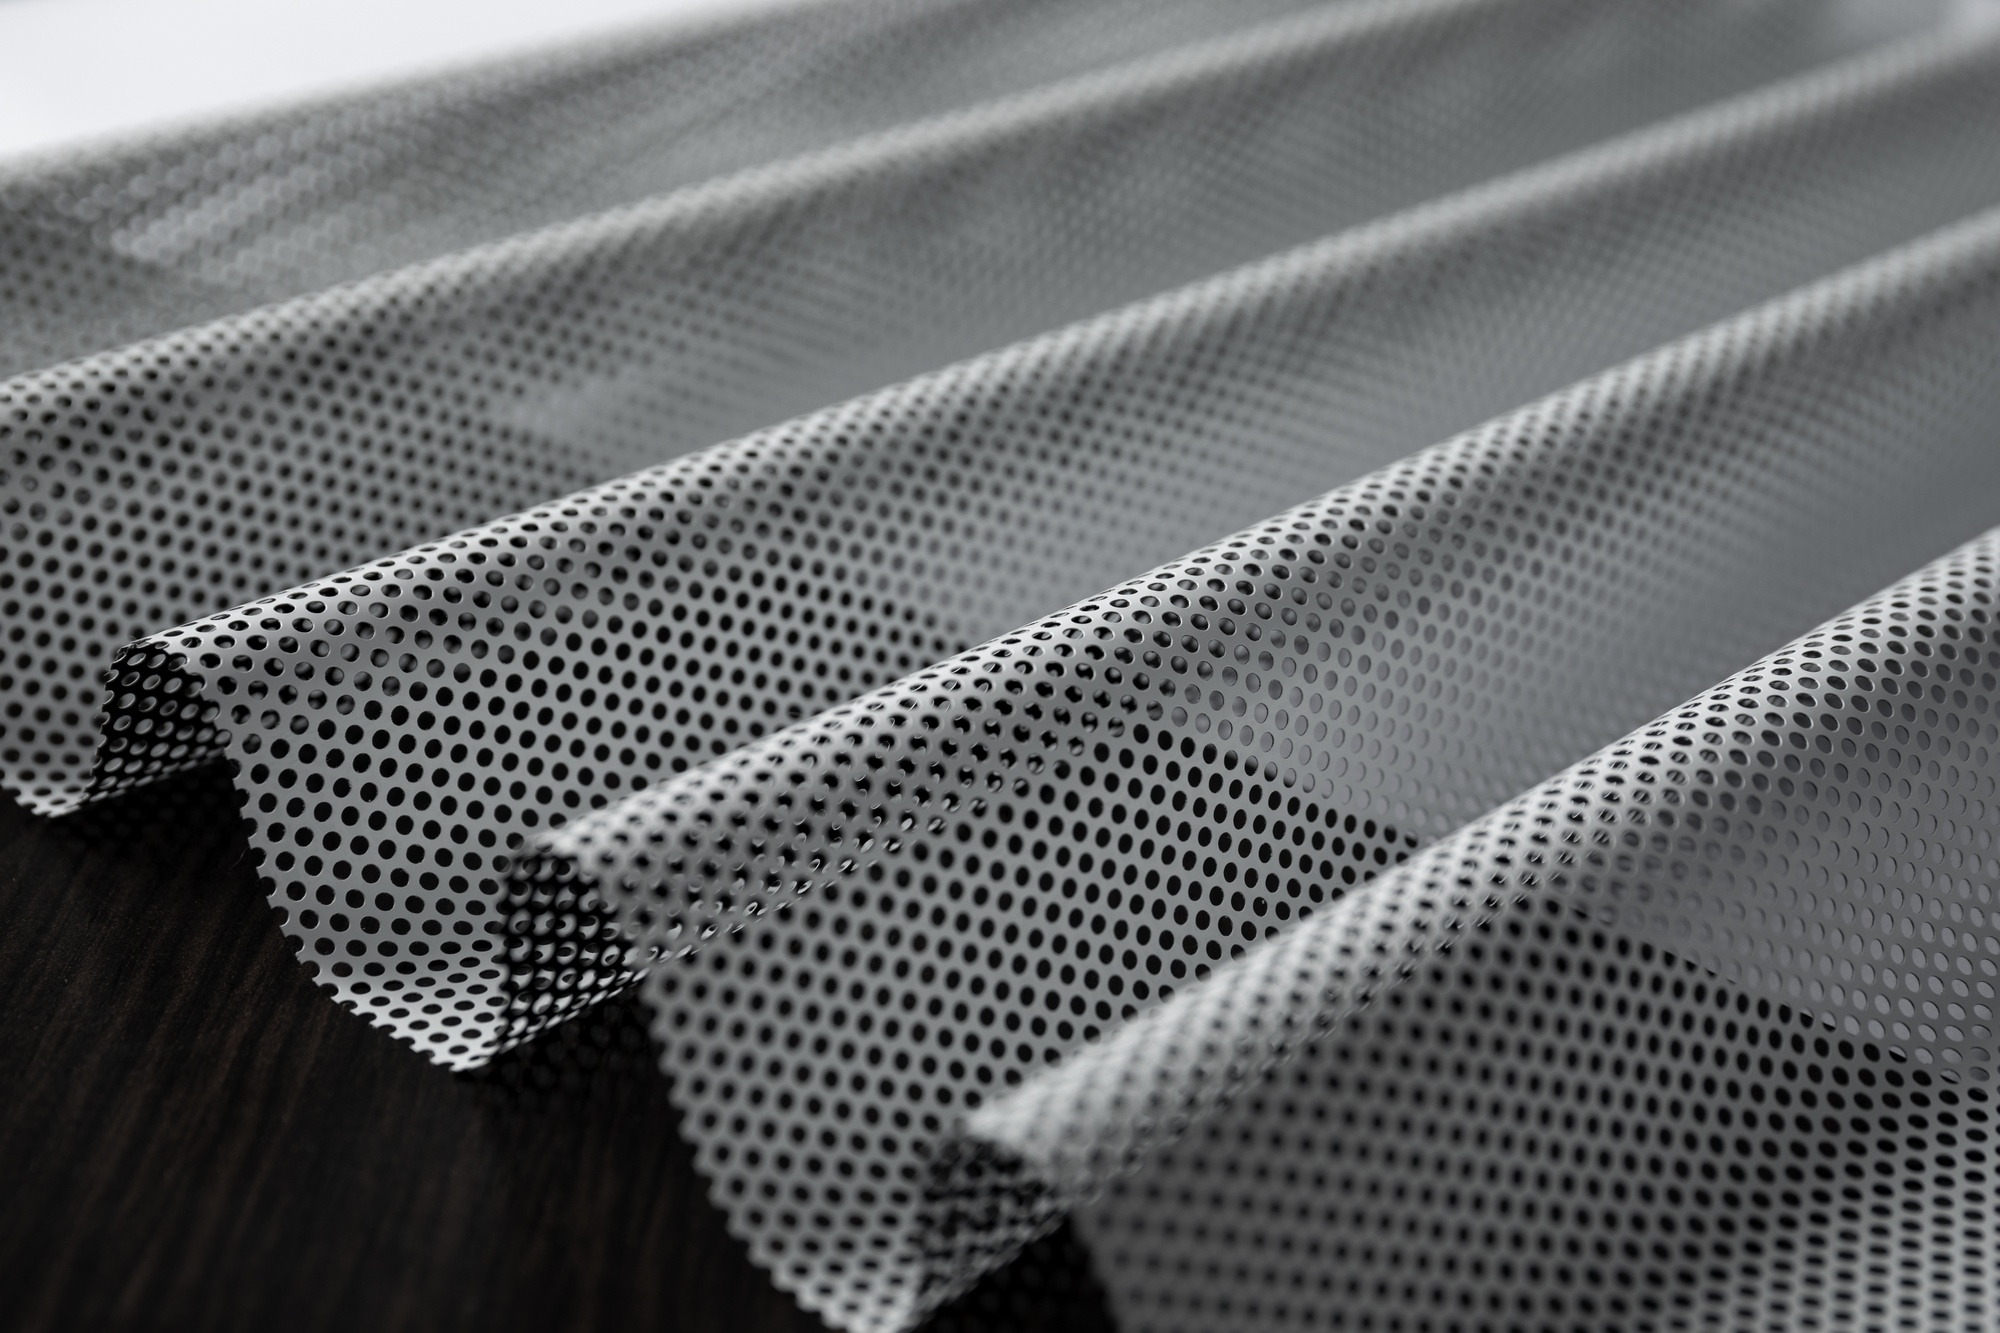 close-up-perforated-fabric_23-2149894541